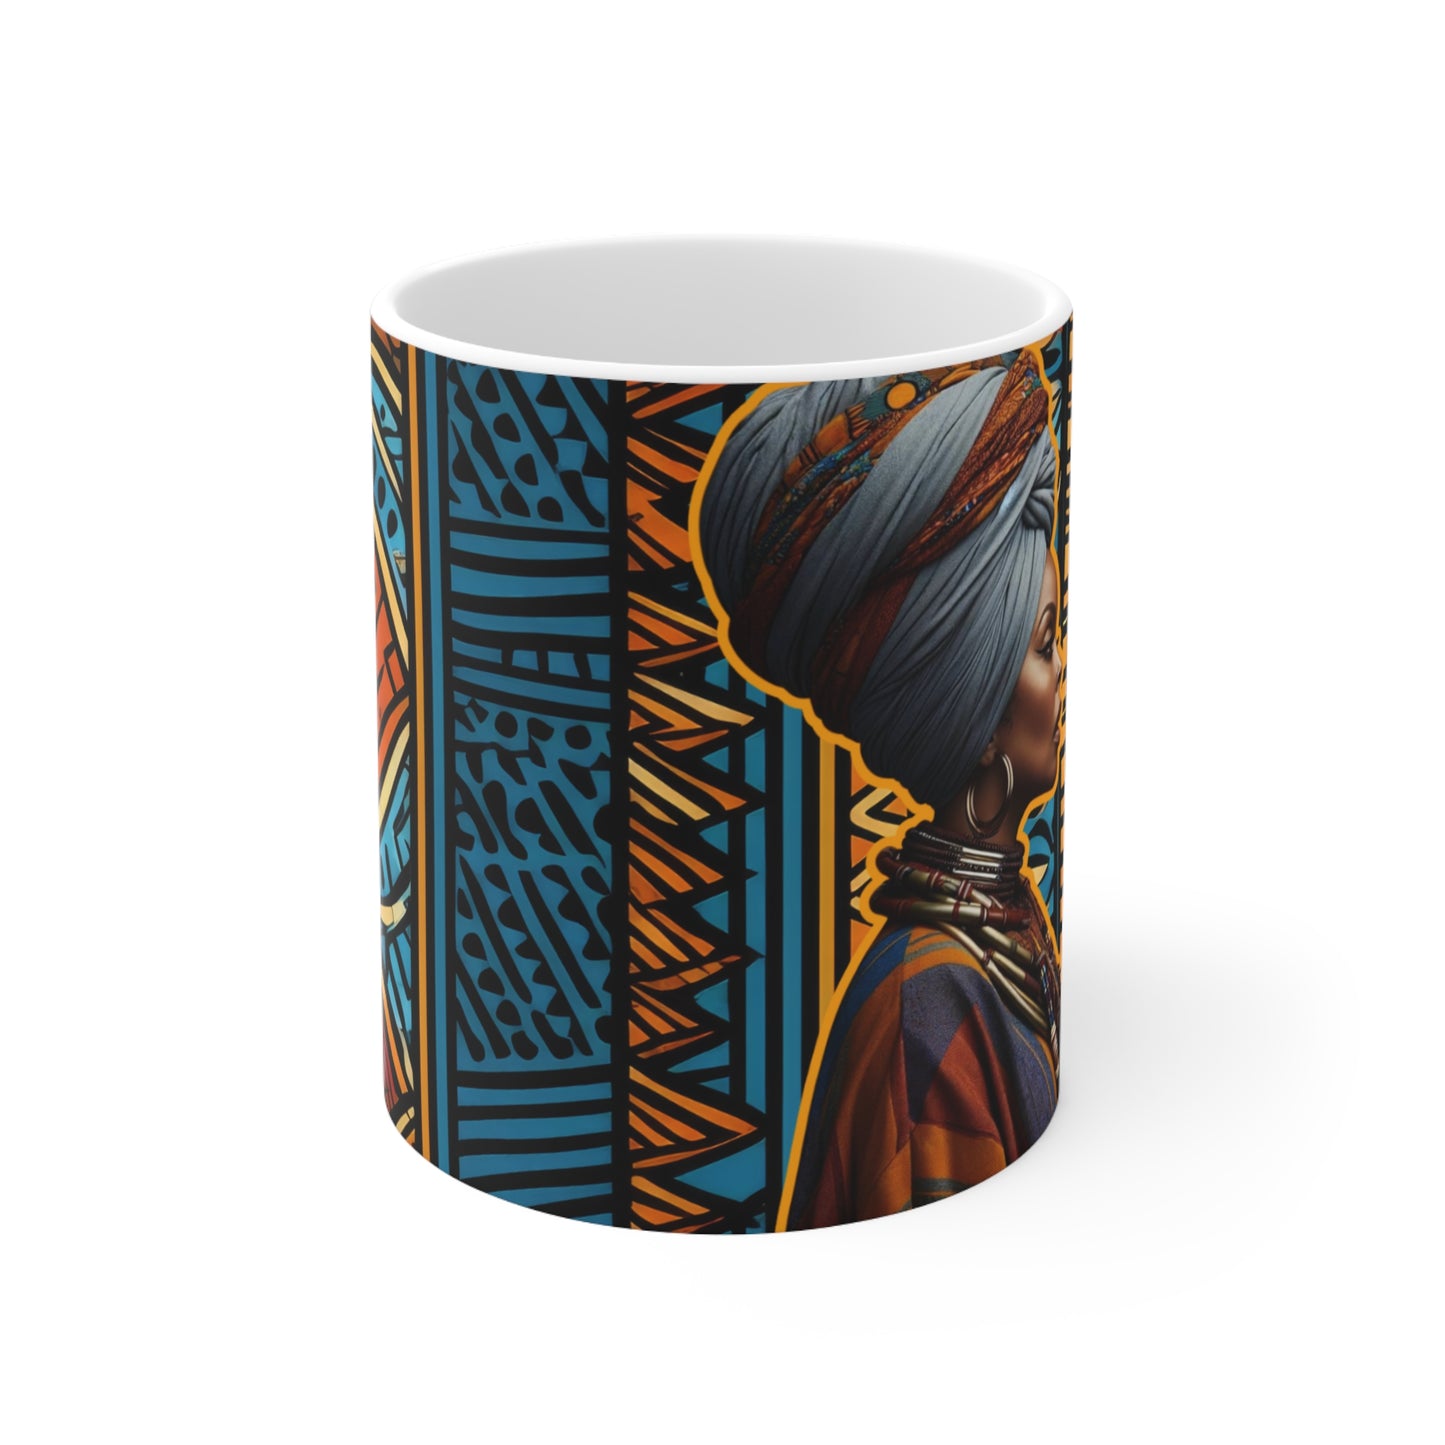 She is BRAVE: Inspirational African Queen Mug - Ceramic Coffee Cups, 11oz, 15oz